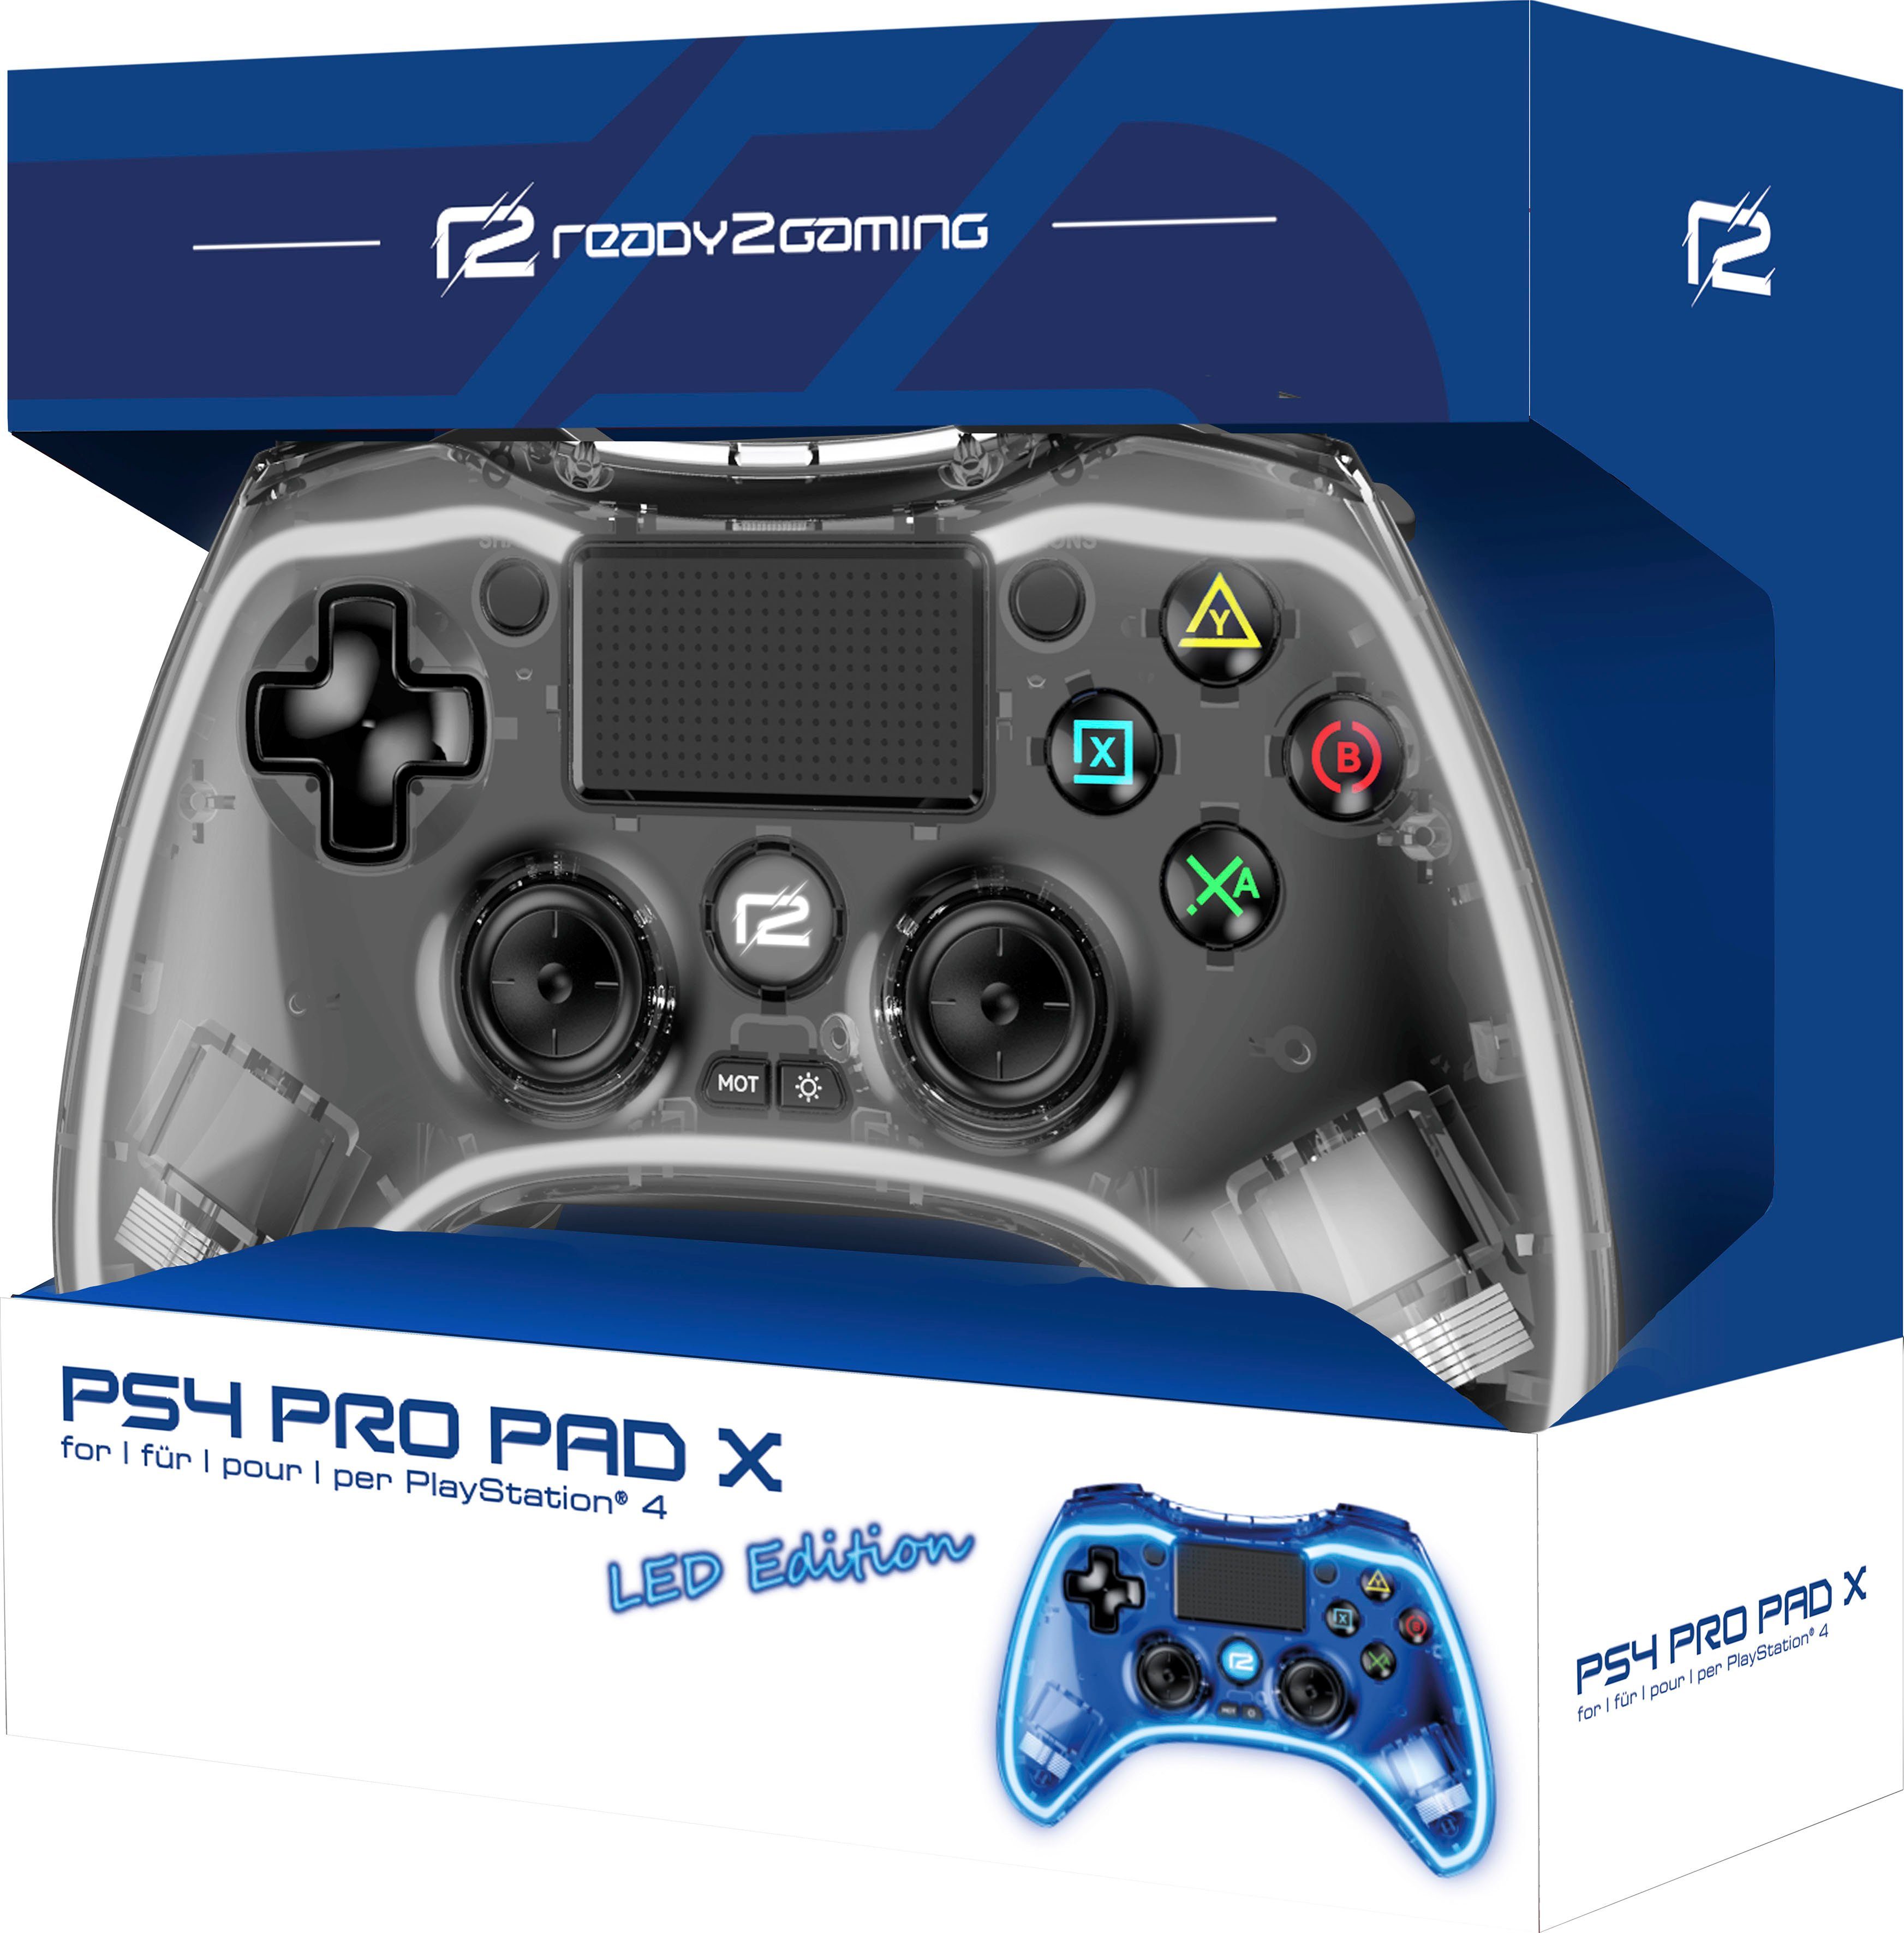 Ready2gaming PS4 Pro Pad transparent X Controller LED Beleuchtung blauer mit Led Edition